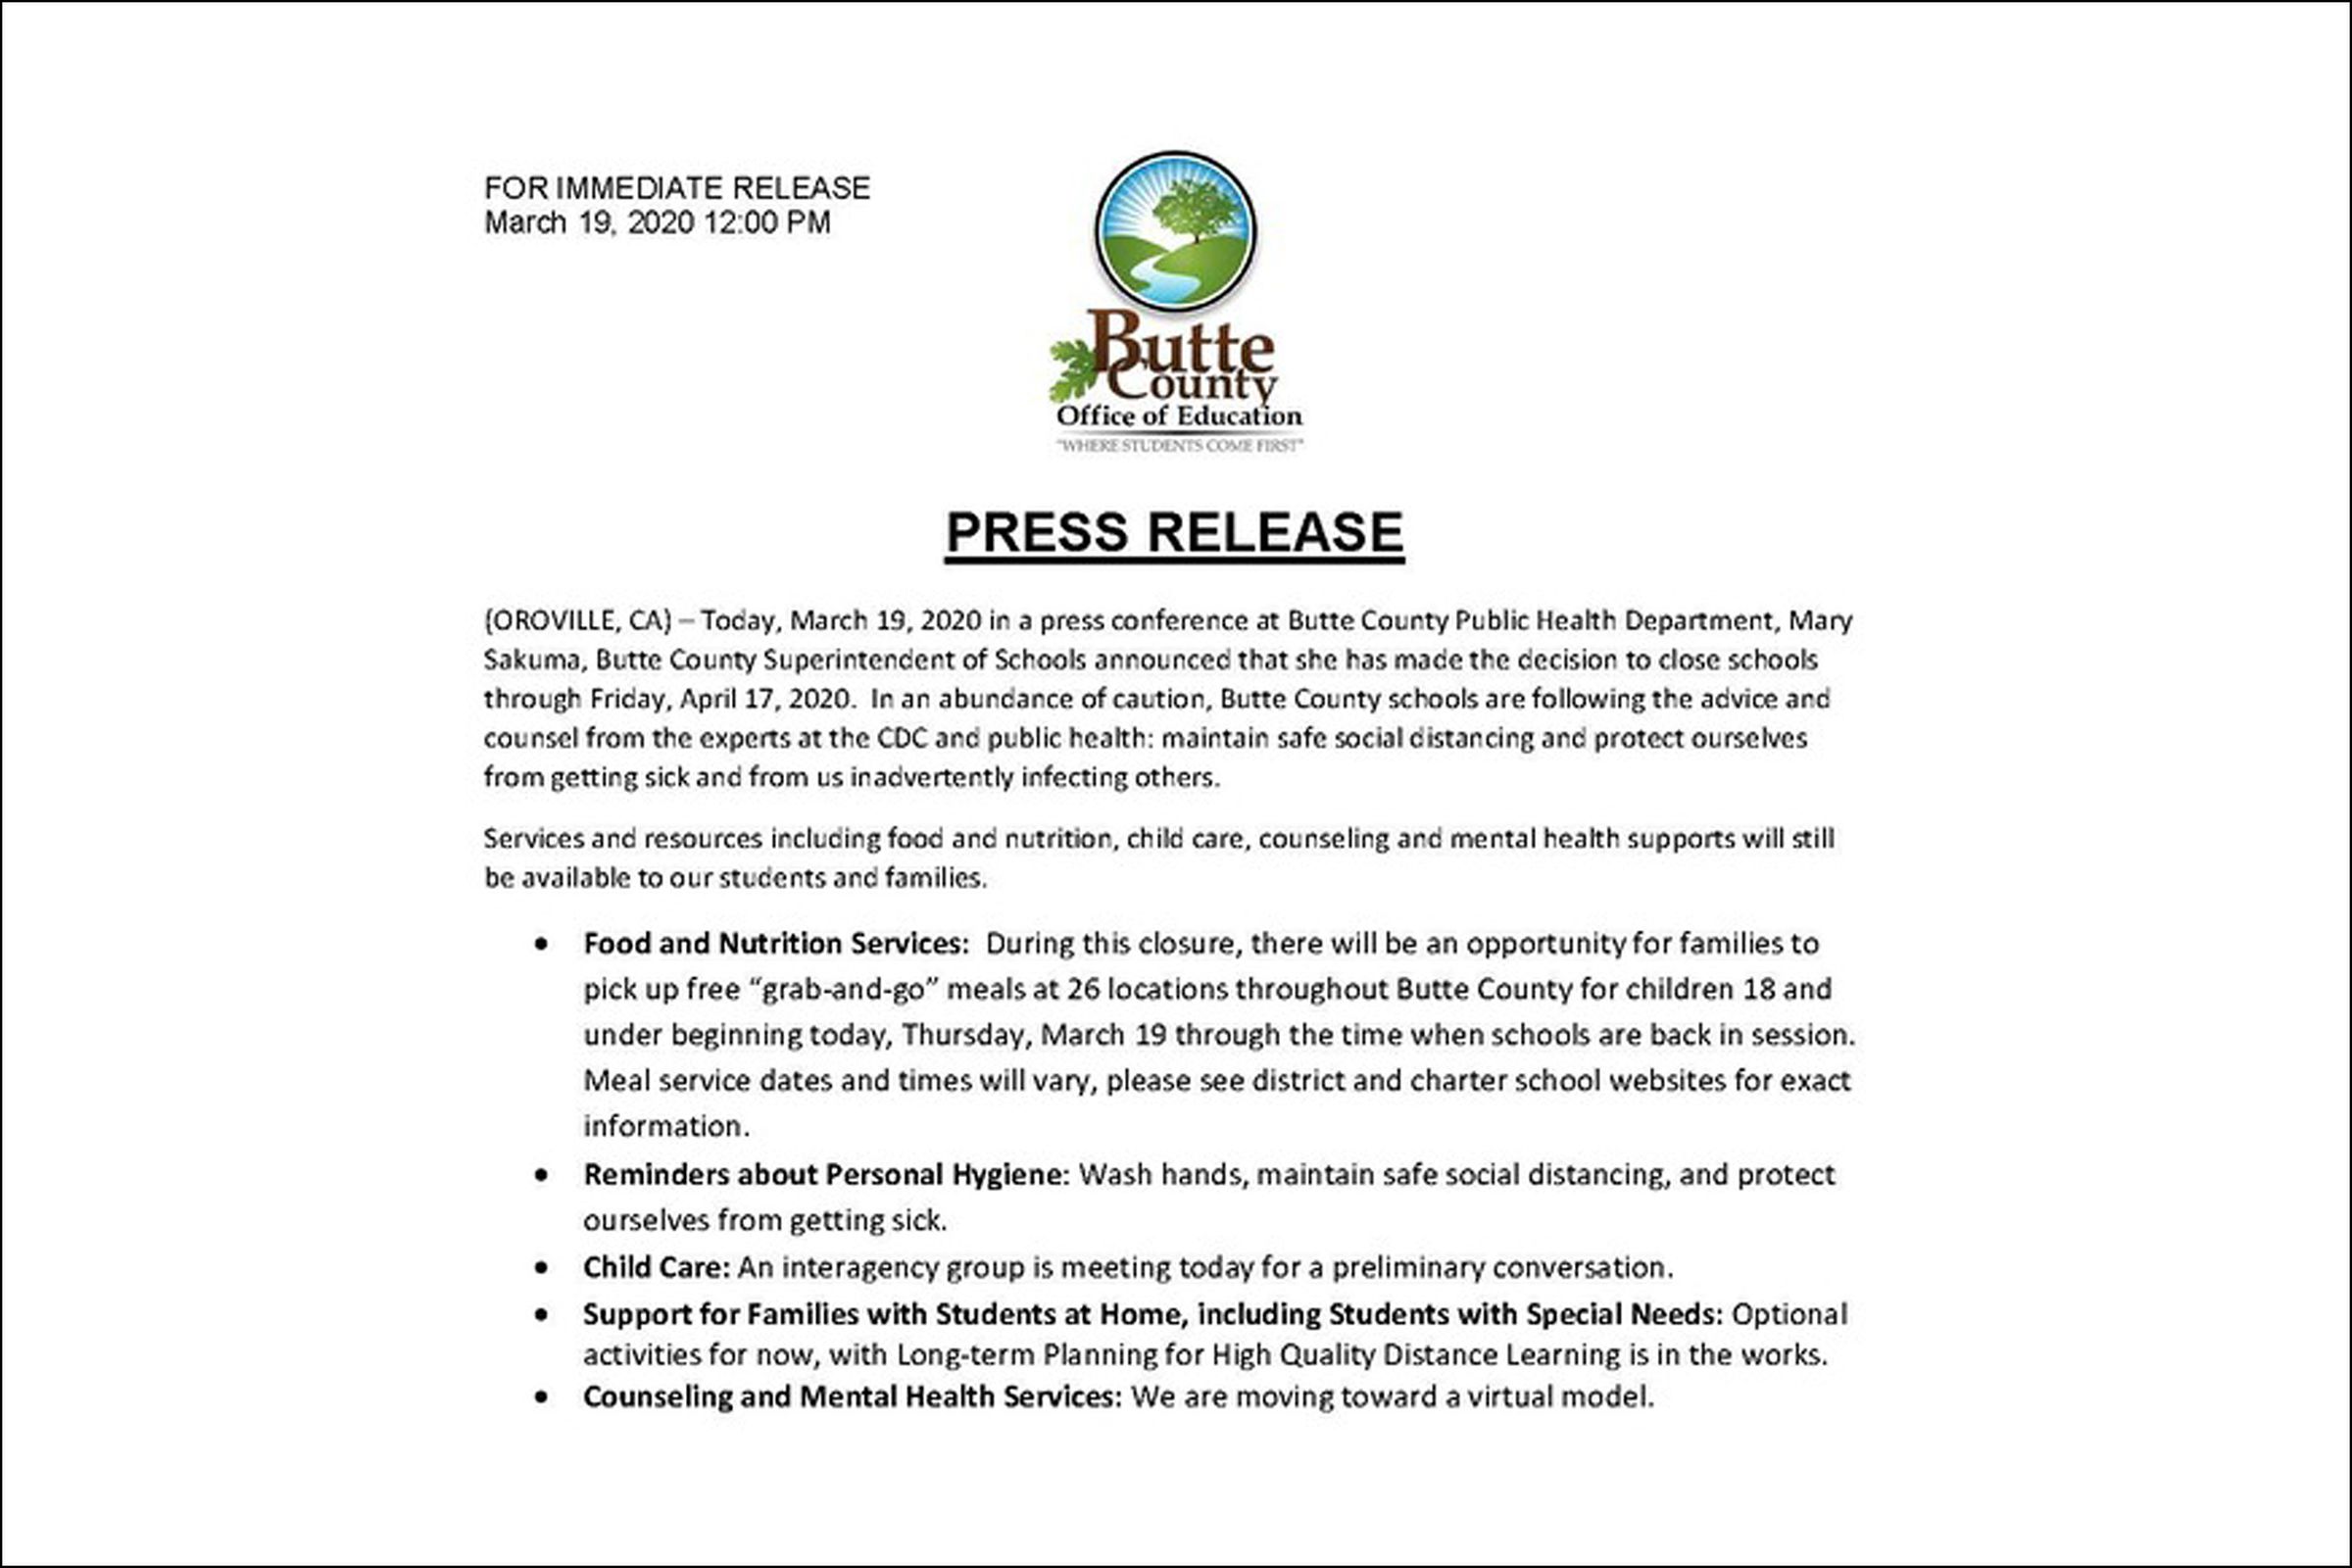 A press release from Butte County Office of Education stating their decision to extend the closure of schools.